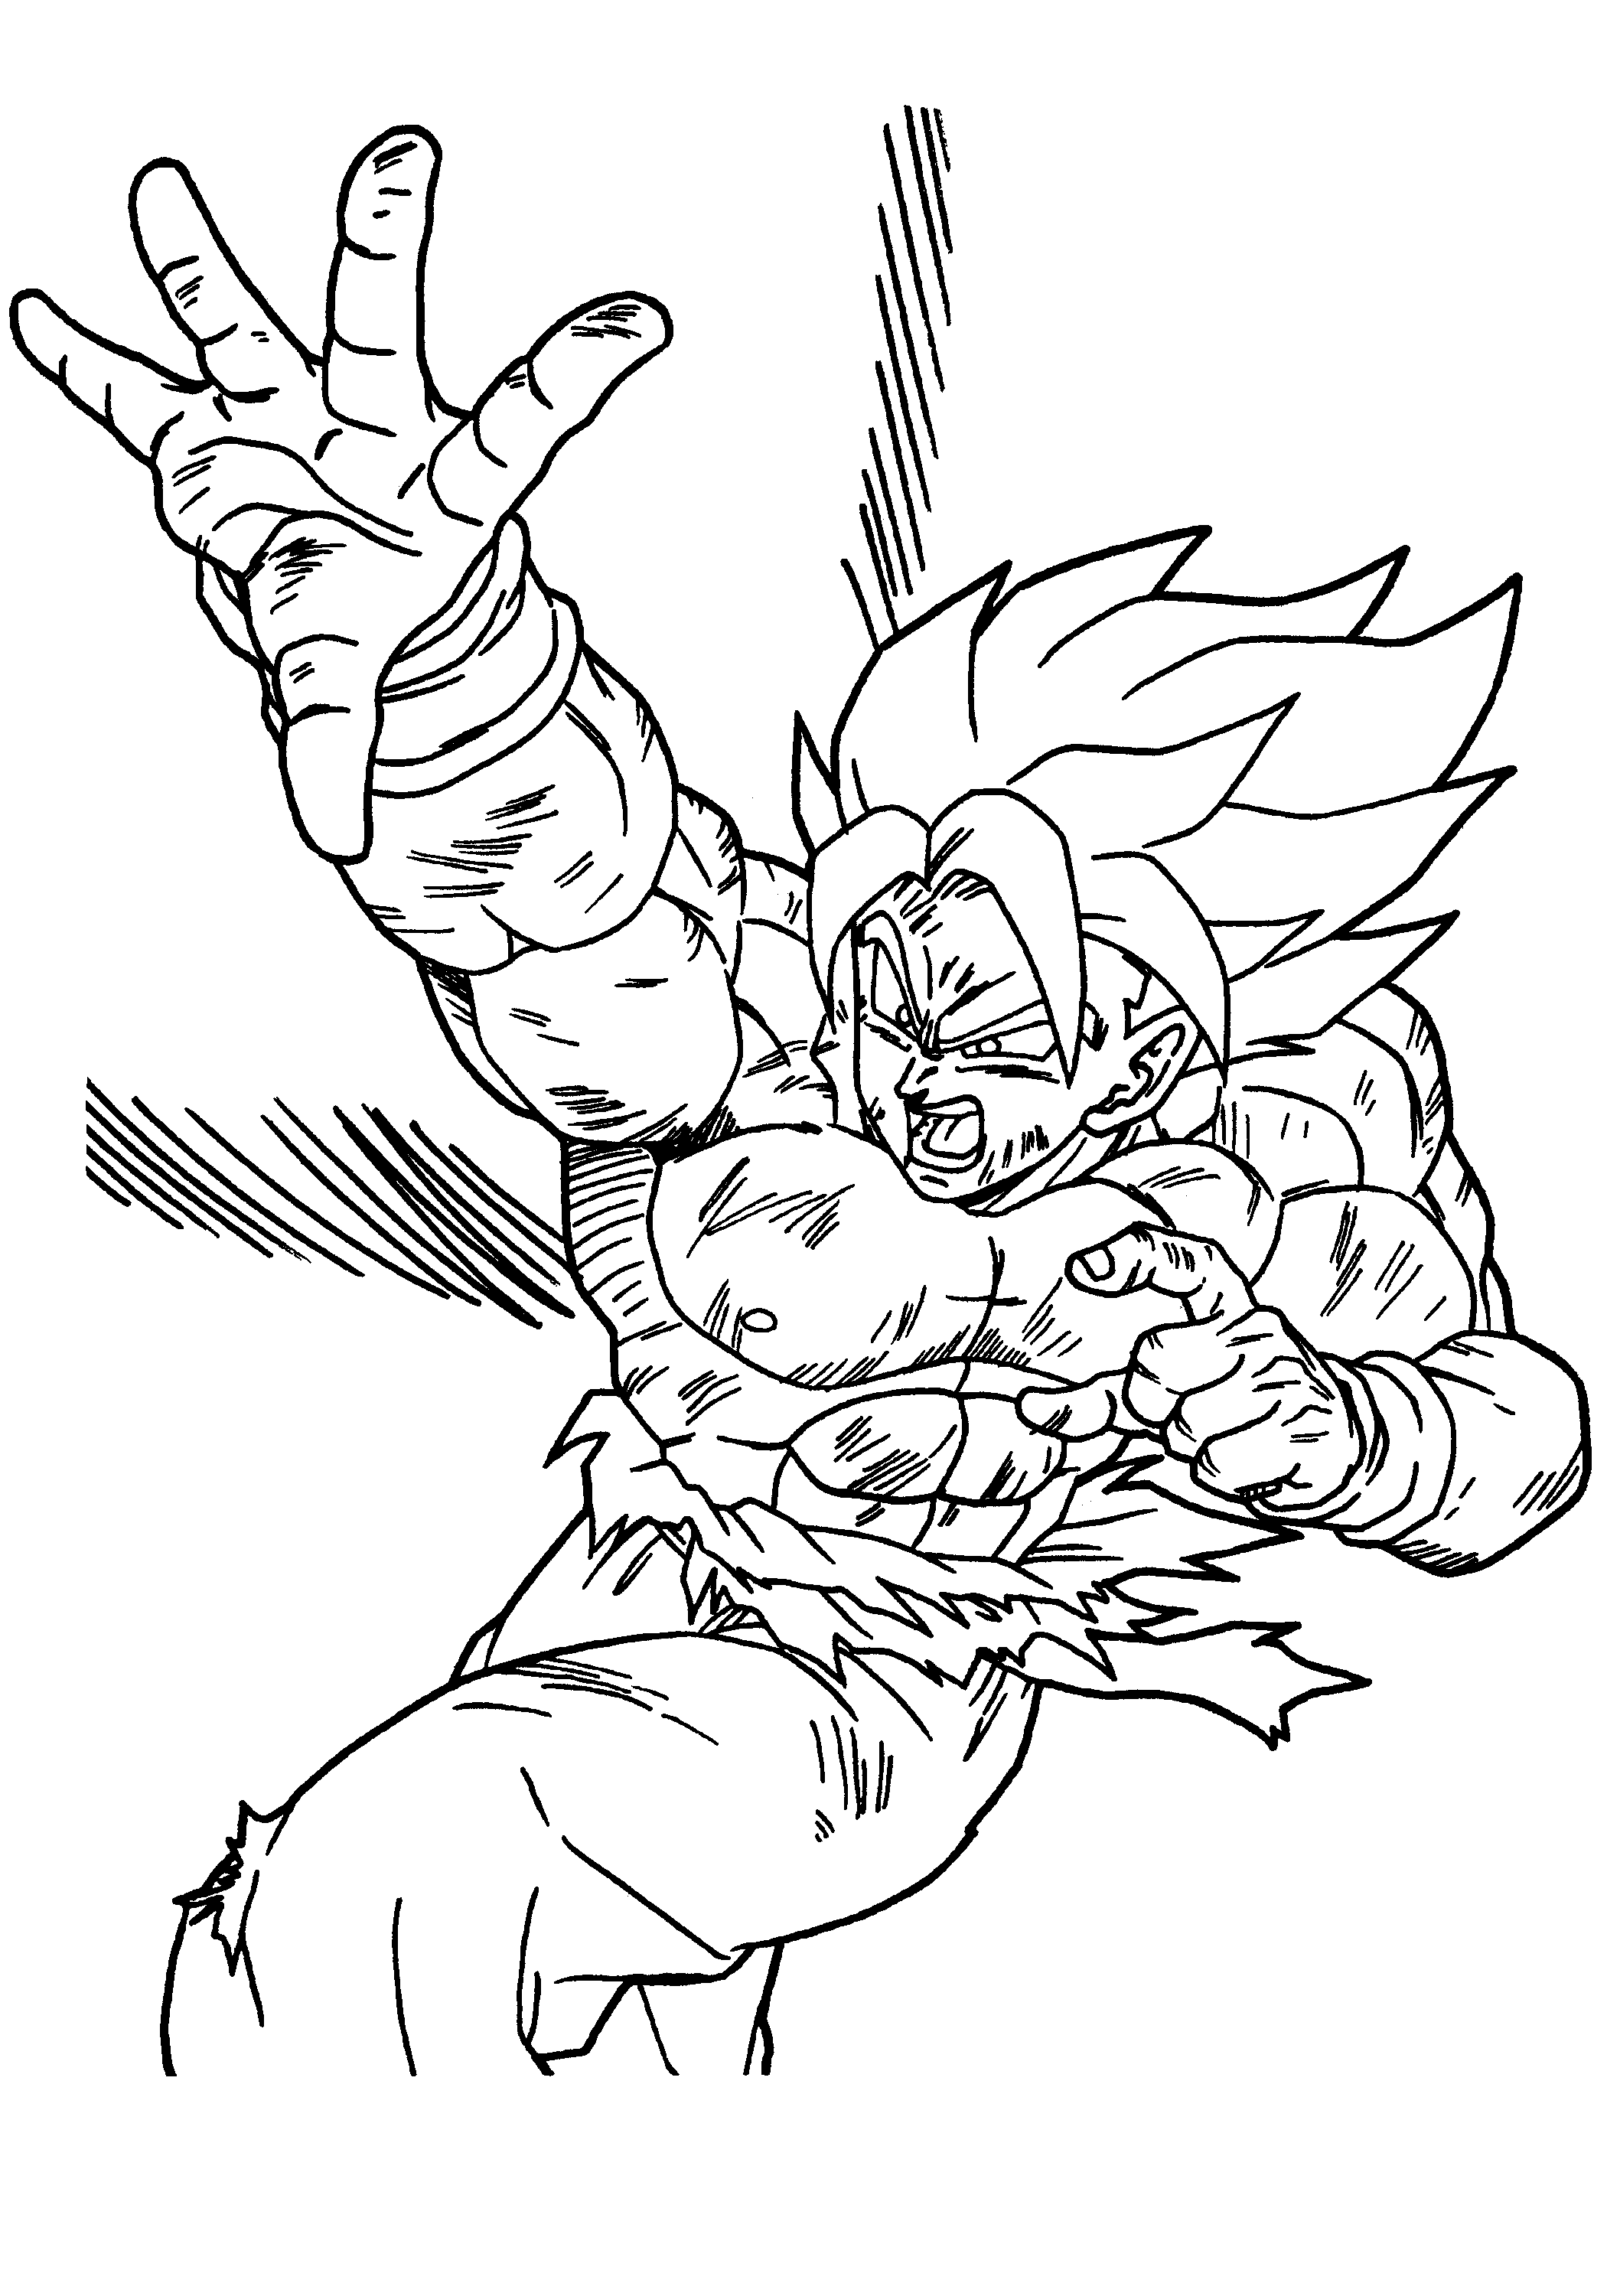 dbz colouring pages free printable dragon ball z coloring pages for kids colouring pages dbz 1 1